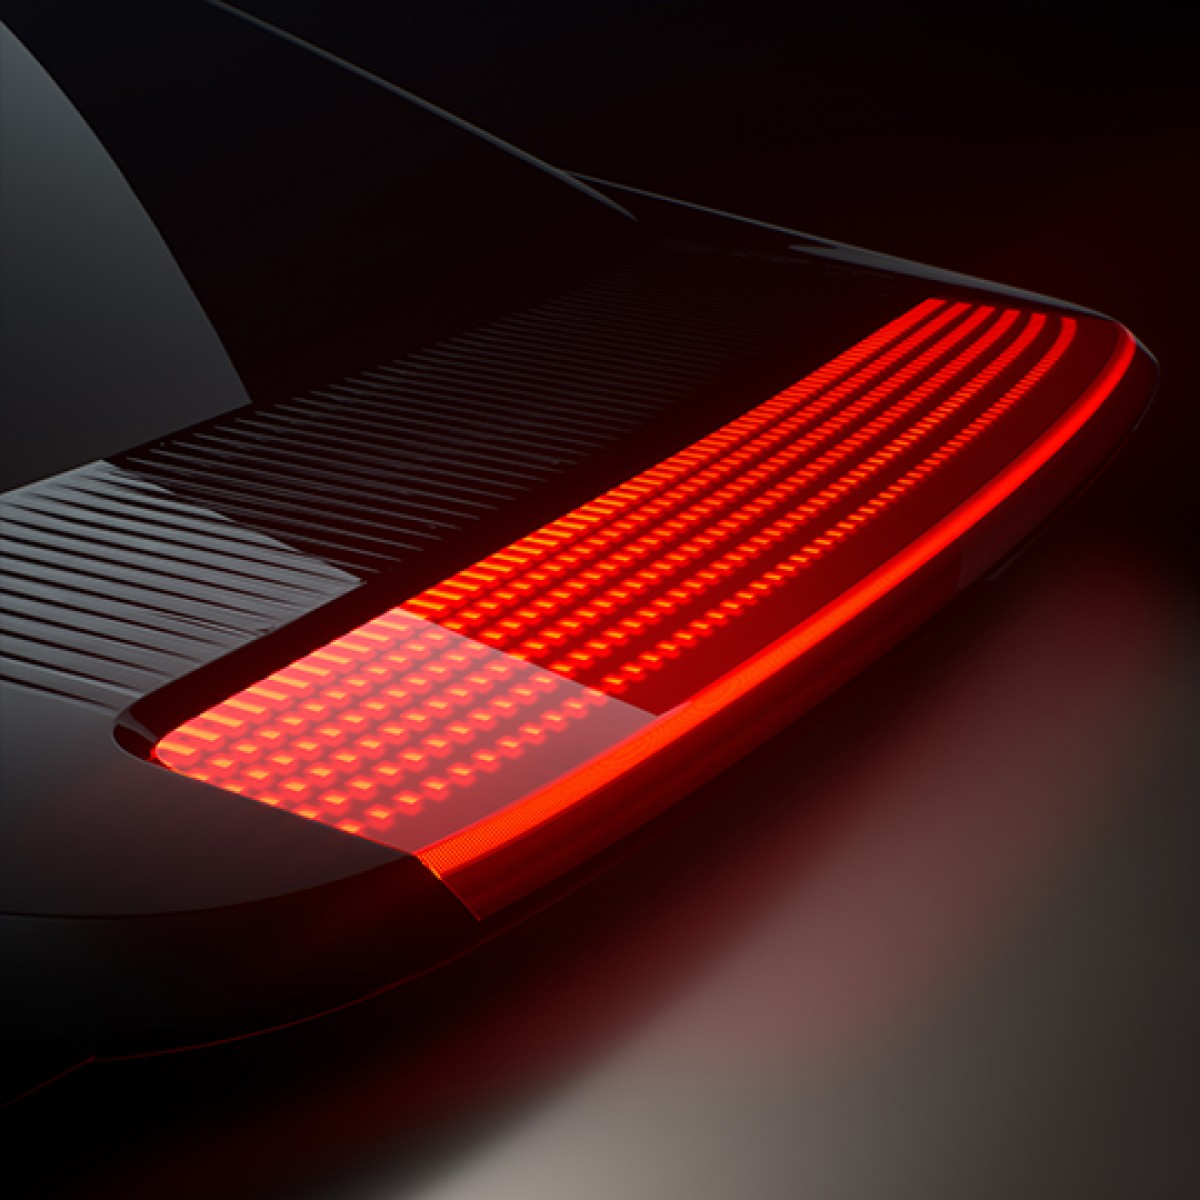 Ioniq 6 will have the biggest LED rear light ever